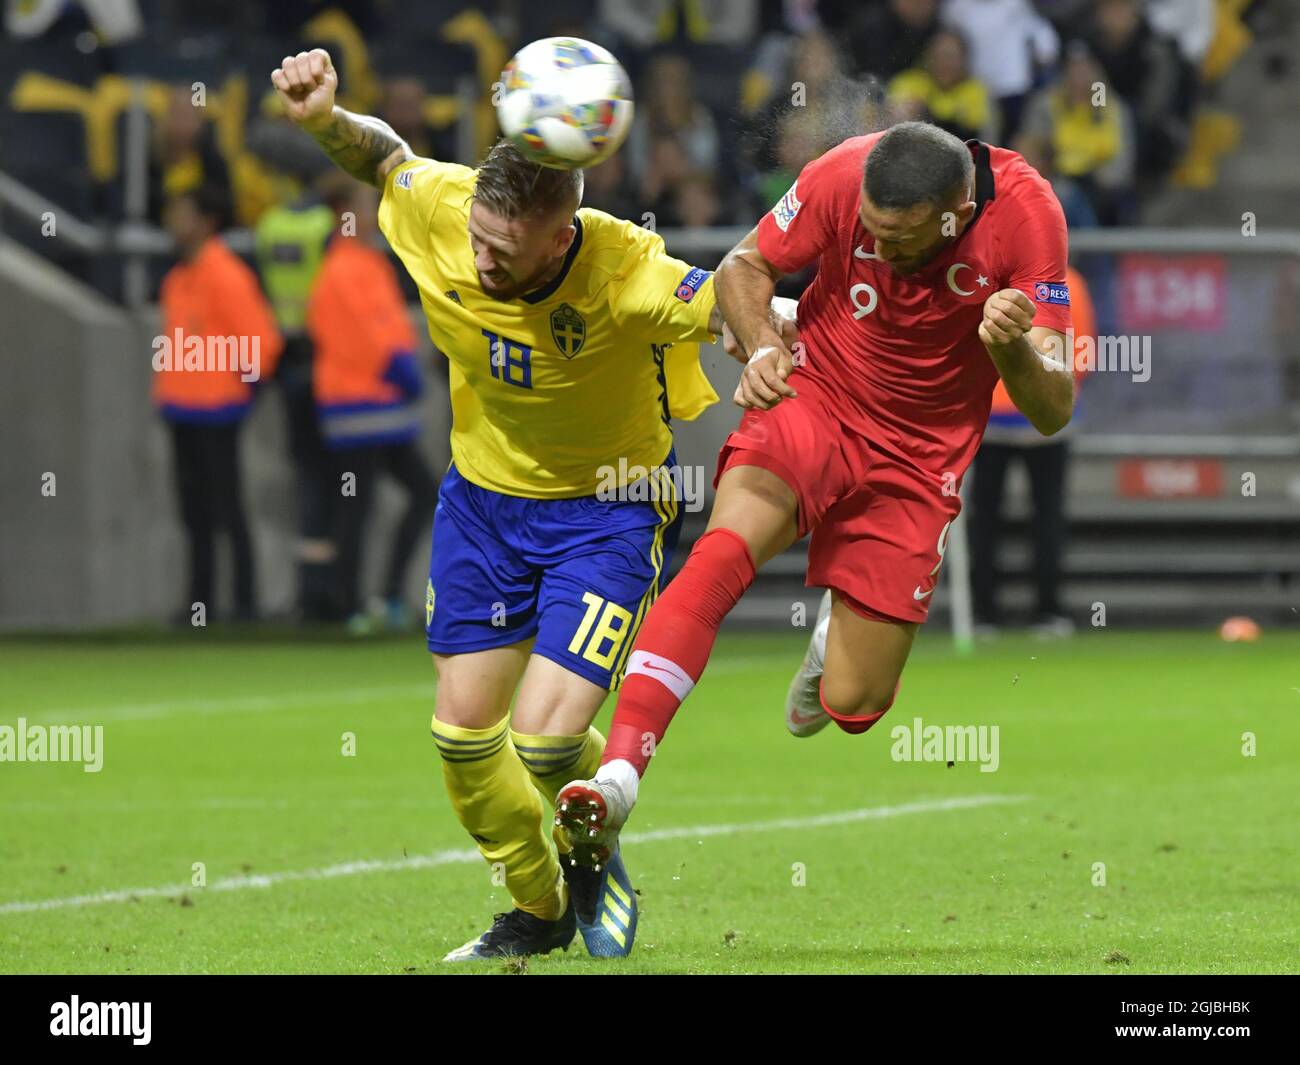 Sweden's Pontus Jansson (L) fights for the ball with Turkey's Cenk Tosun during the UEFA Nations League, league B, group 2, soccer match between Sweden and Turkey at Friends Arena in Solna, Stockholm, Sweden, on Sept. 10, 2018. Photo: Jonas Ekstromer / TT / code 10030  Stock Photo